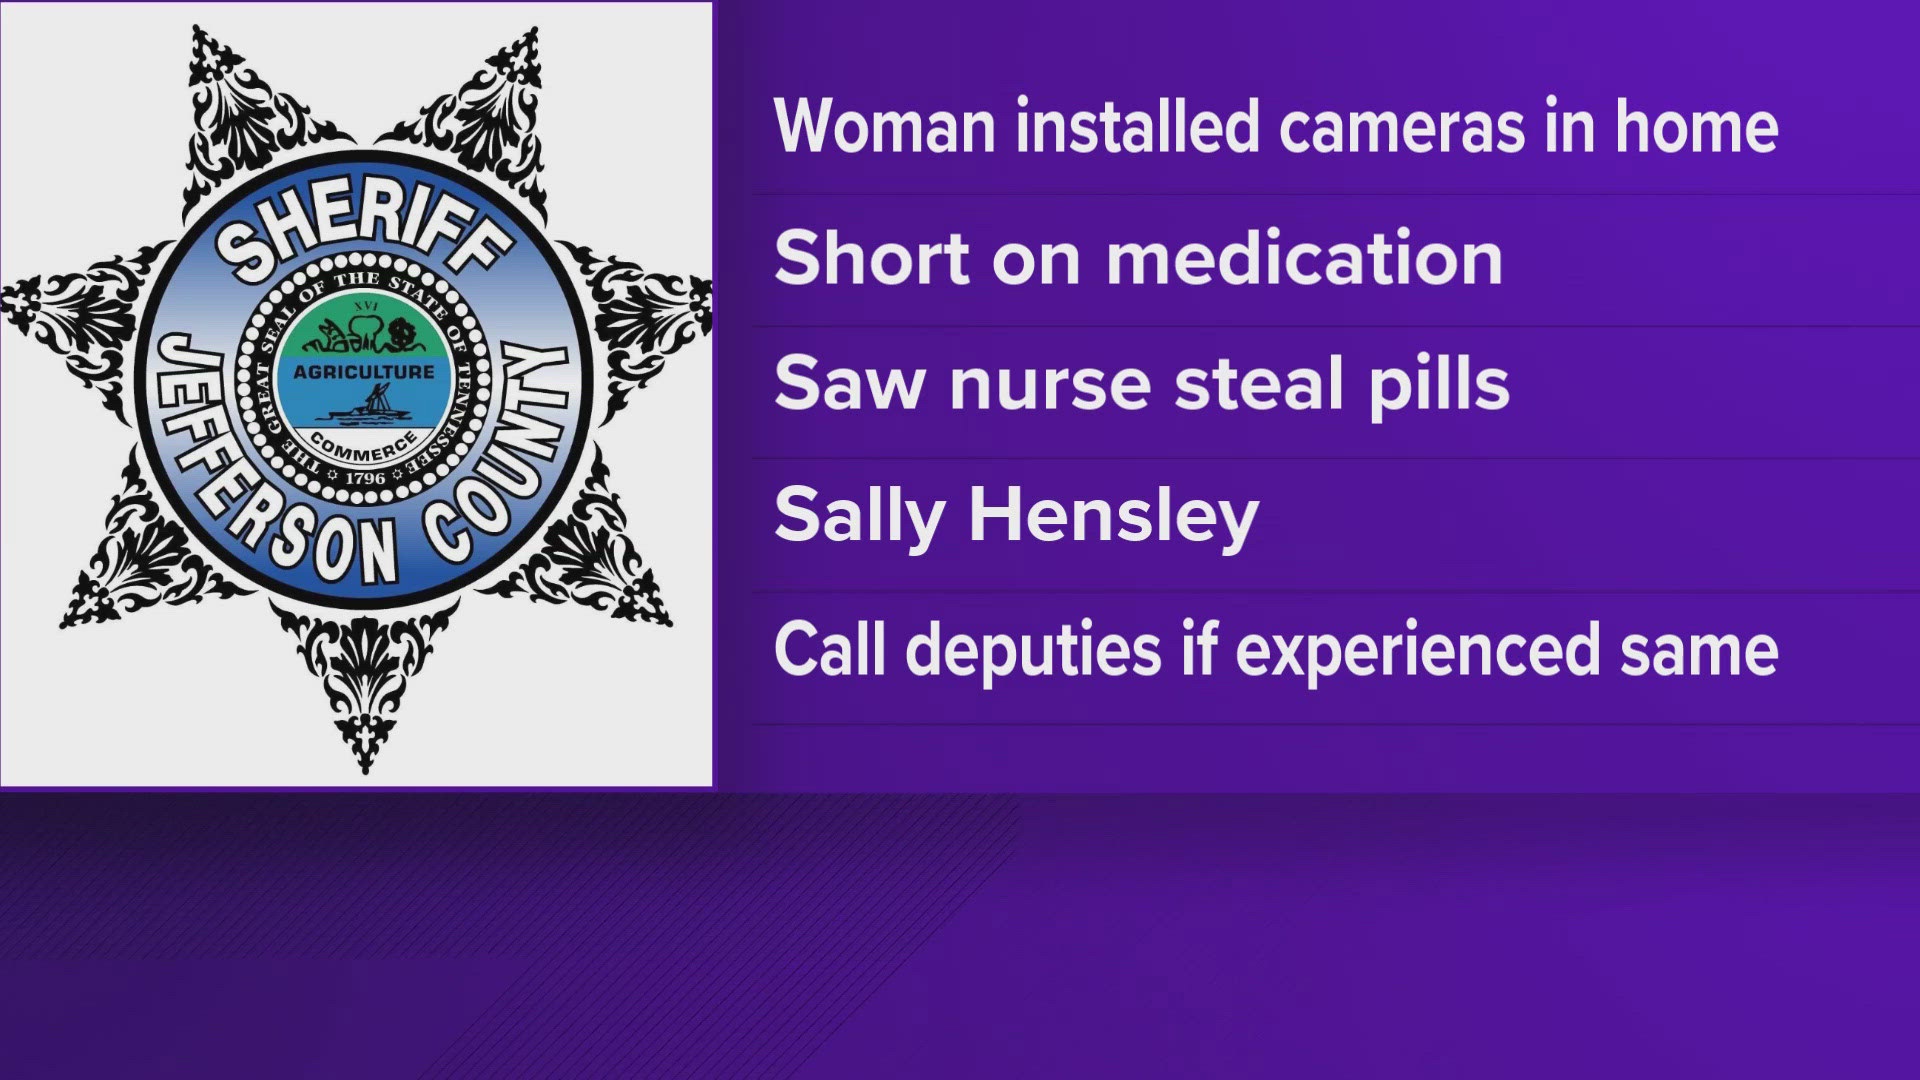 The Jefferson County Sheriff's Office said Sally Hensley was arrested after one of her patients saw her steal approximately 15 Hydrocodone pills.